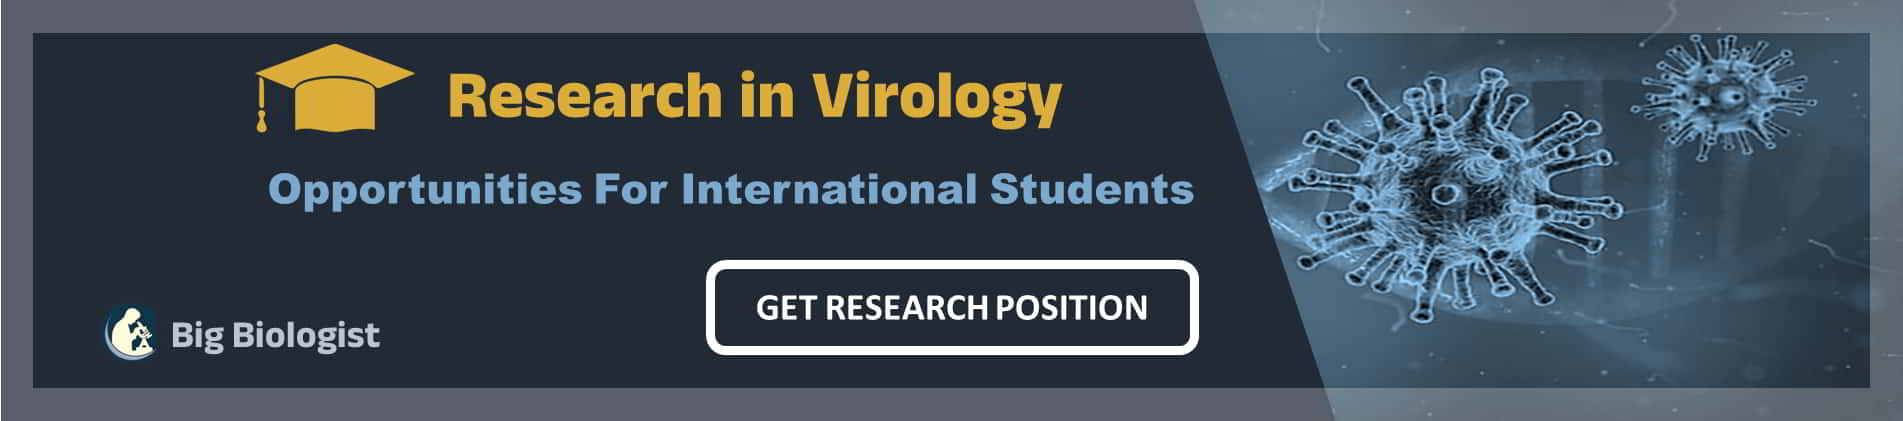 how to get a phd in virology